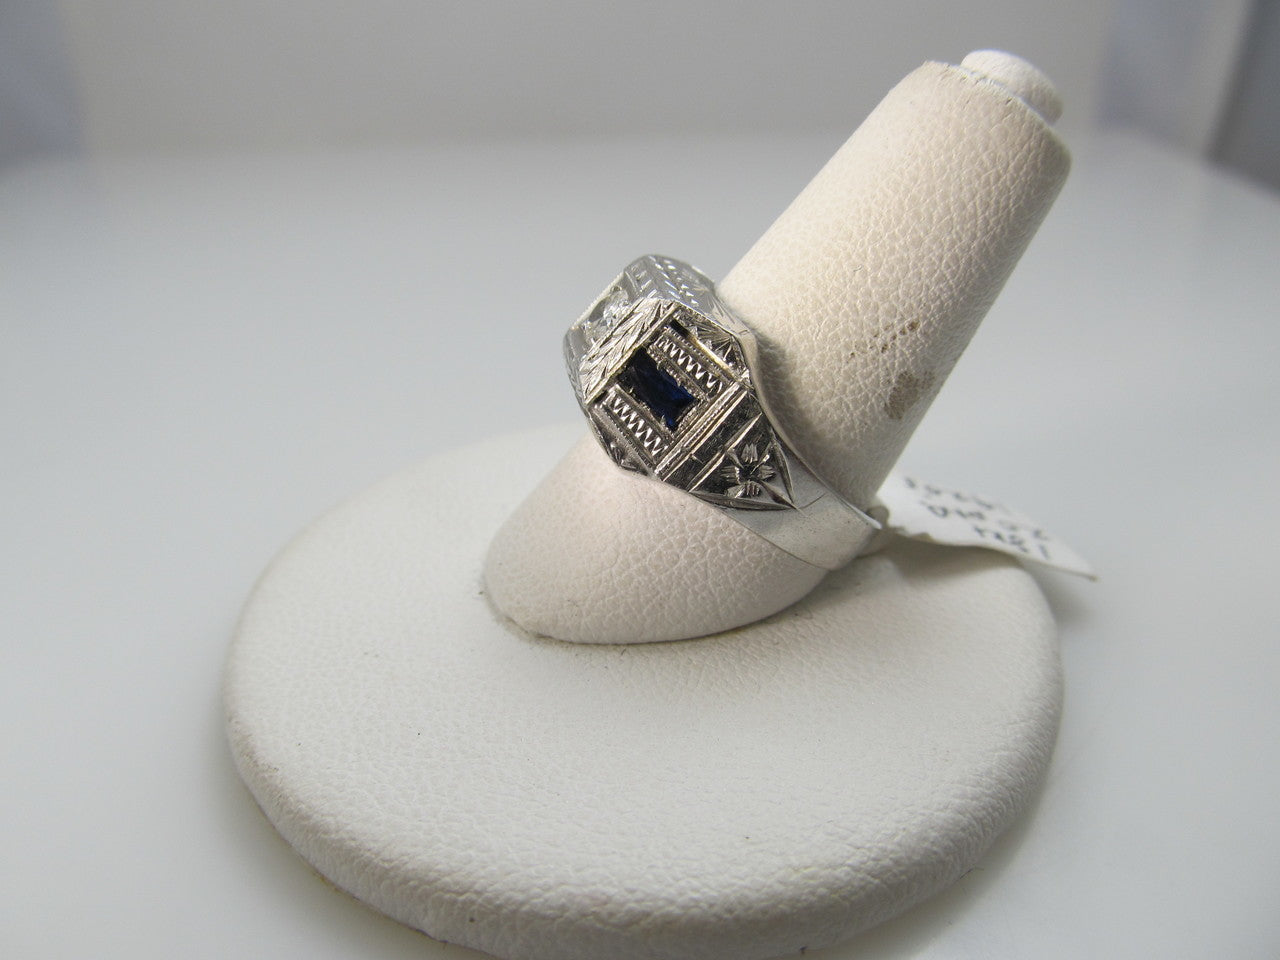 Vintage 18k White Gold Ring With A .20ct Diamond And Sapphires, Circa 1920